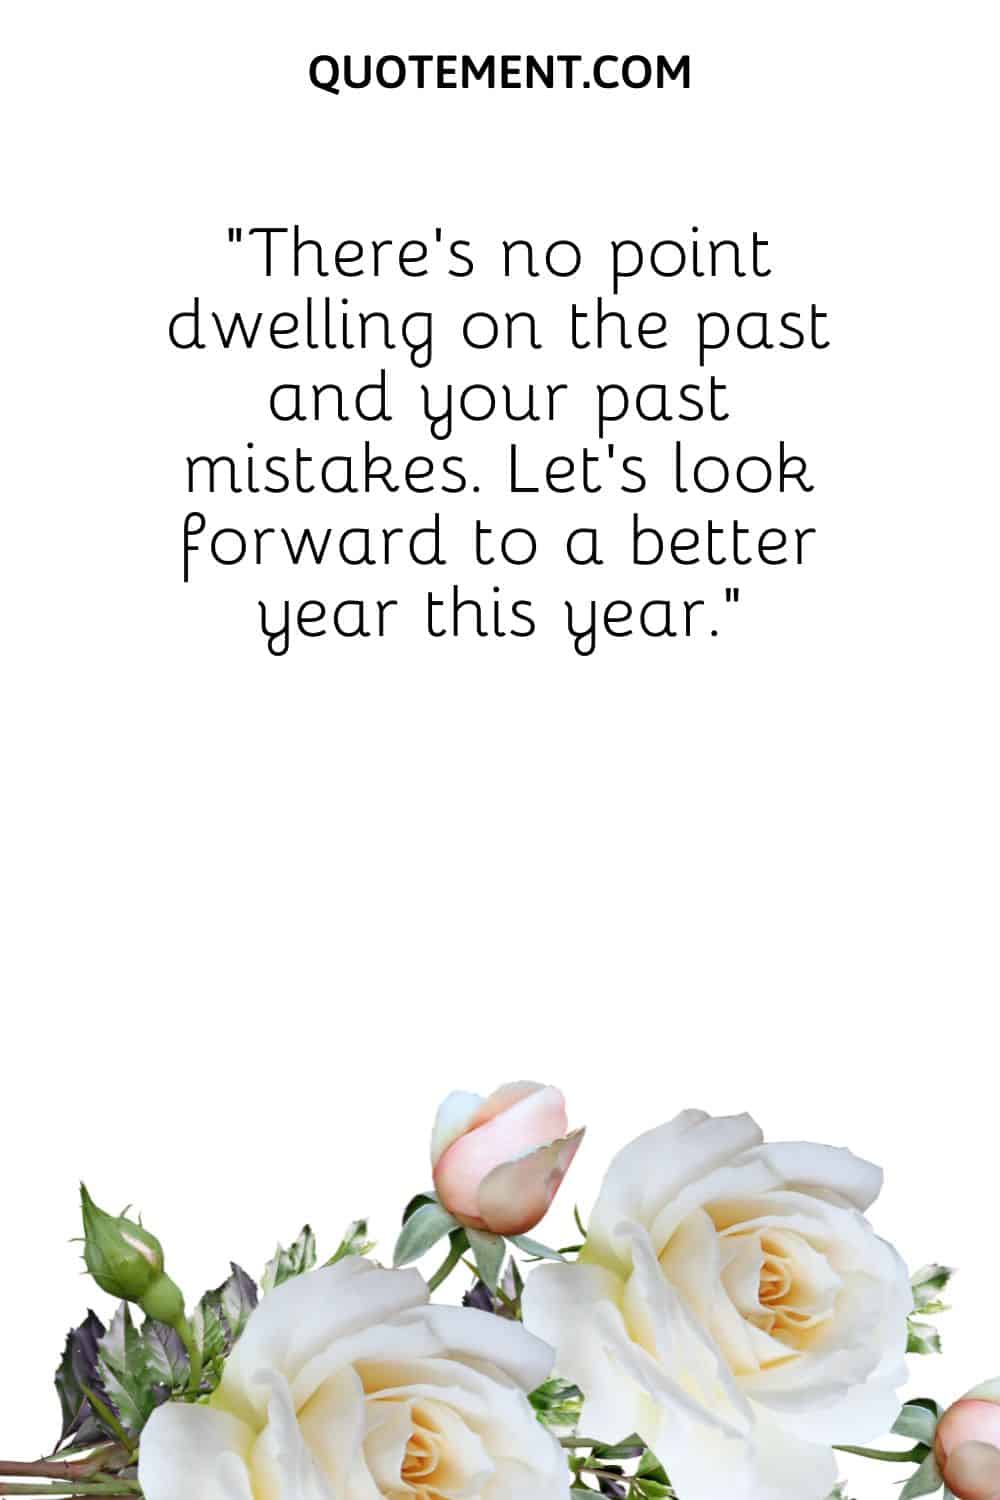 “There’s no point dwelling on the past and your past mistakes. Let’s look forward to a better year this year.”